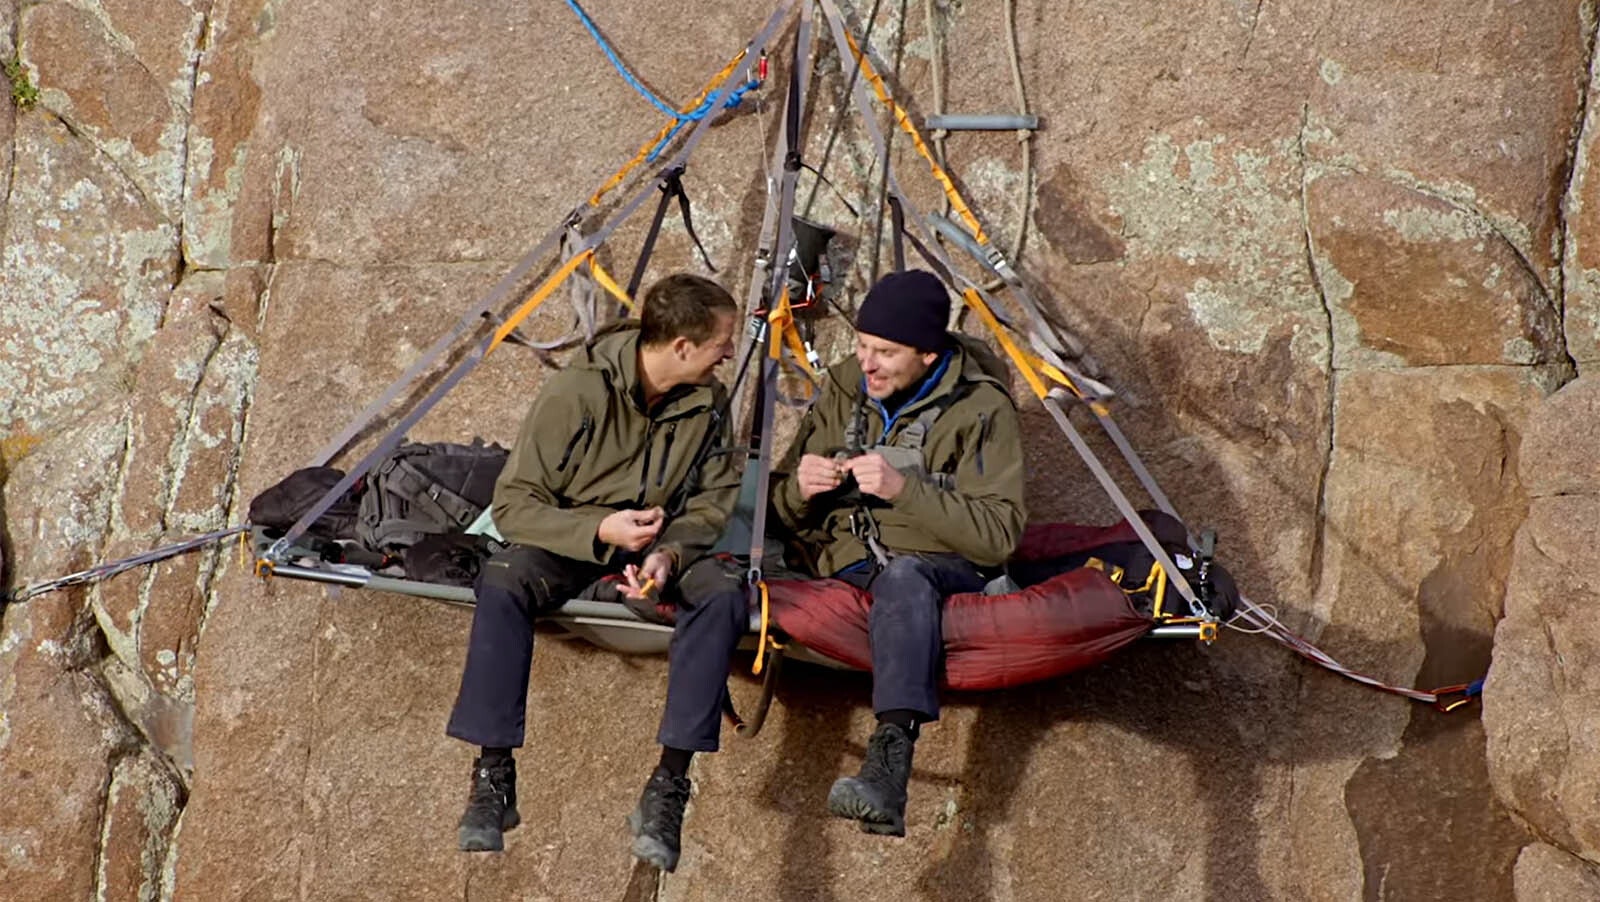 Bear Grylls and actor Bradley Cooper take a meal break hanging from a sheer cliff wall in Wyoming.